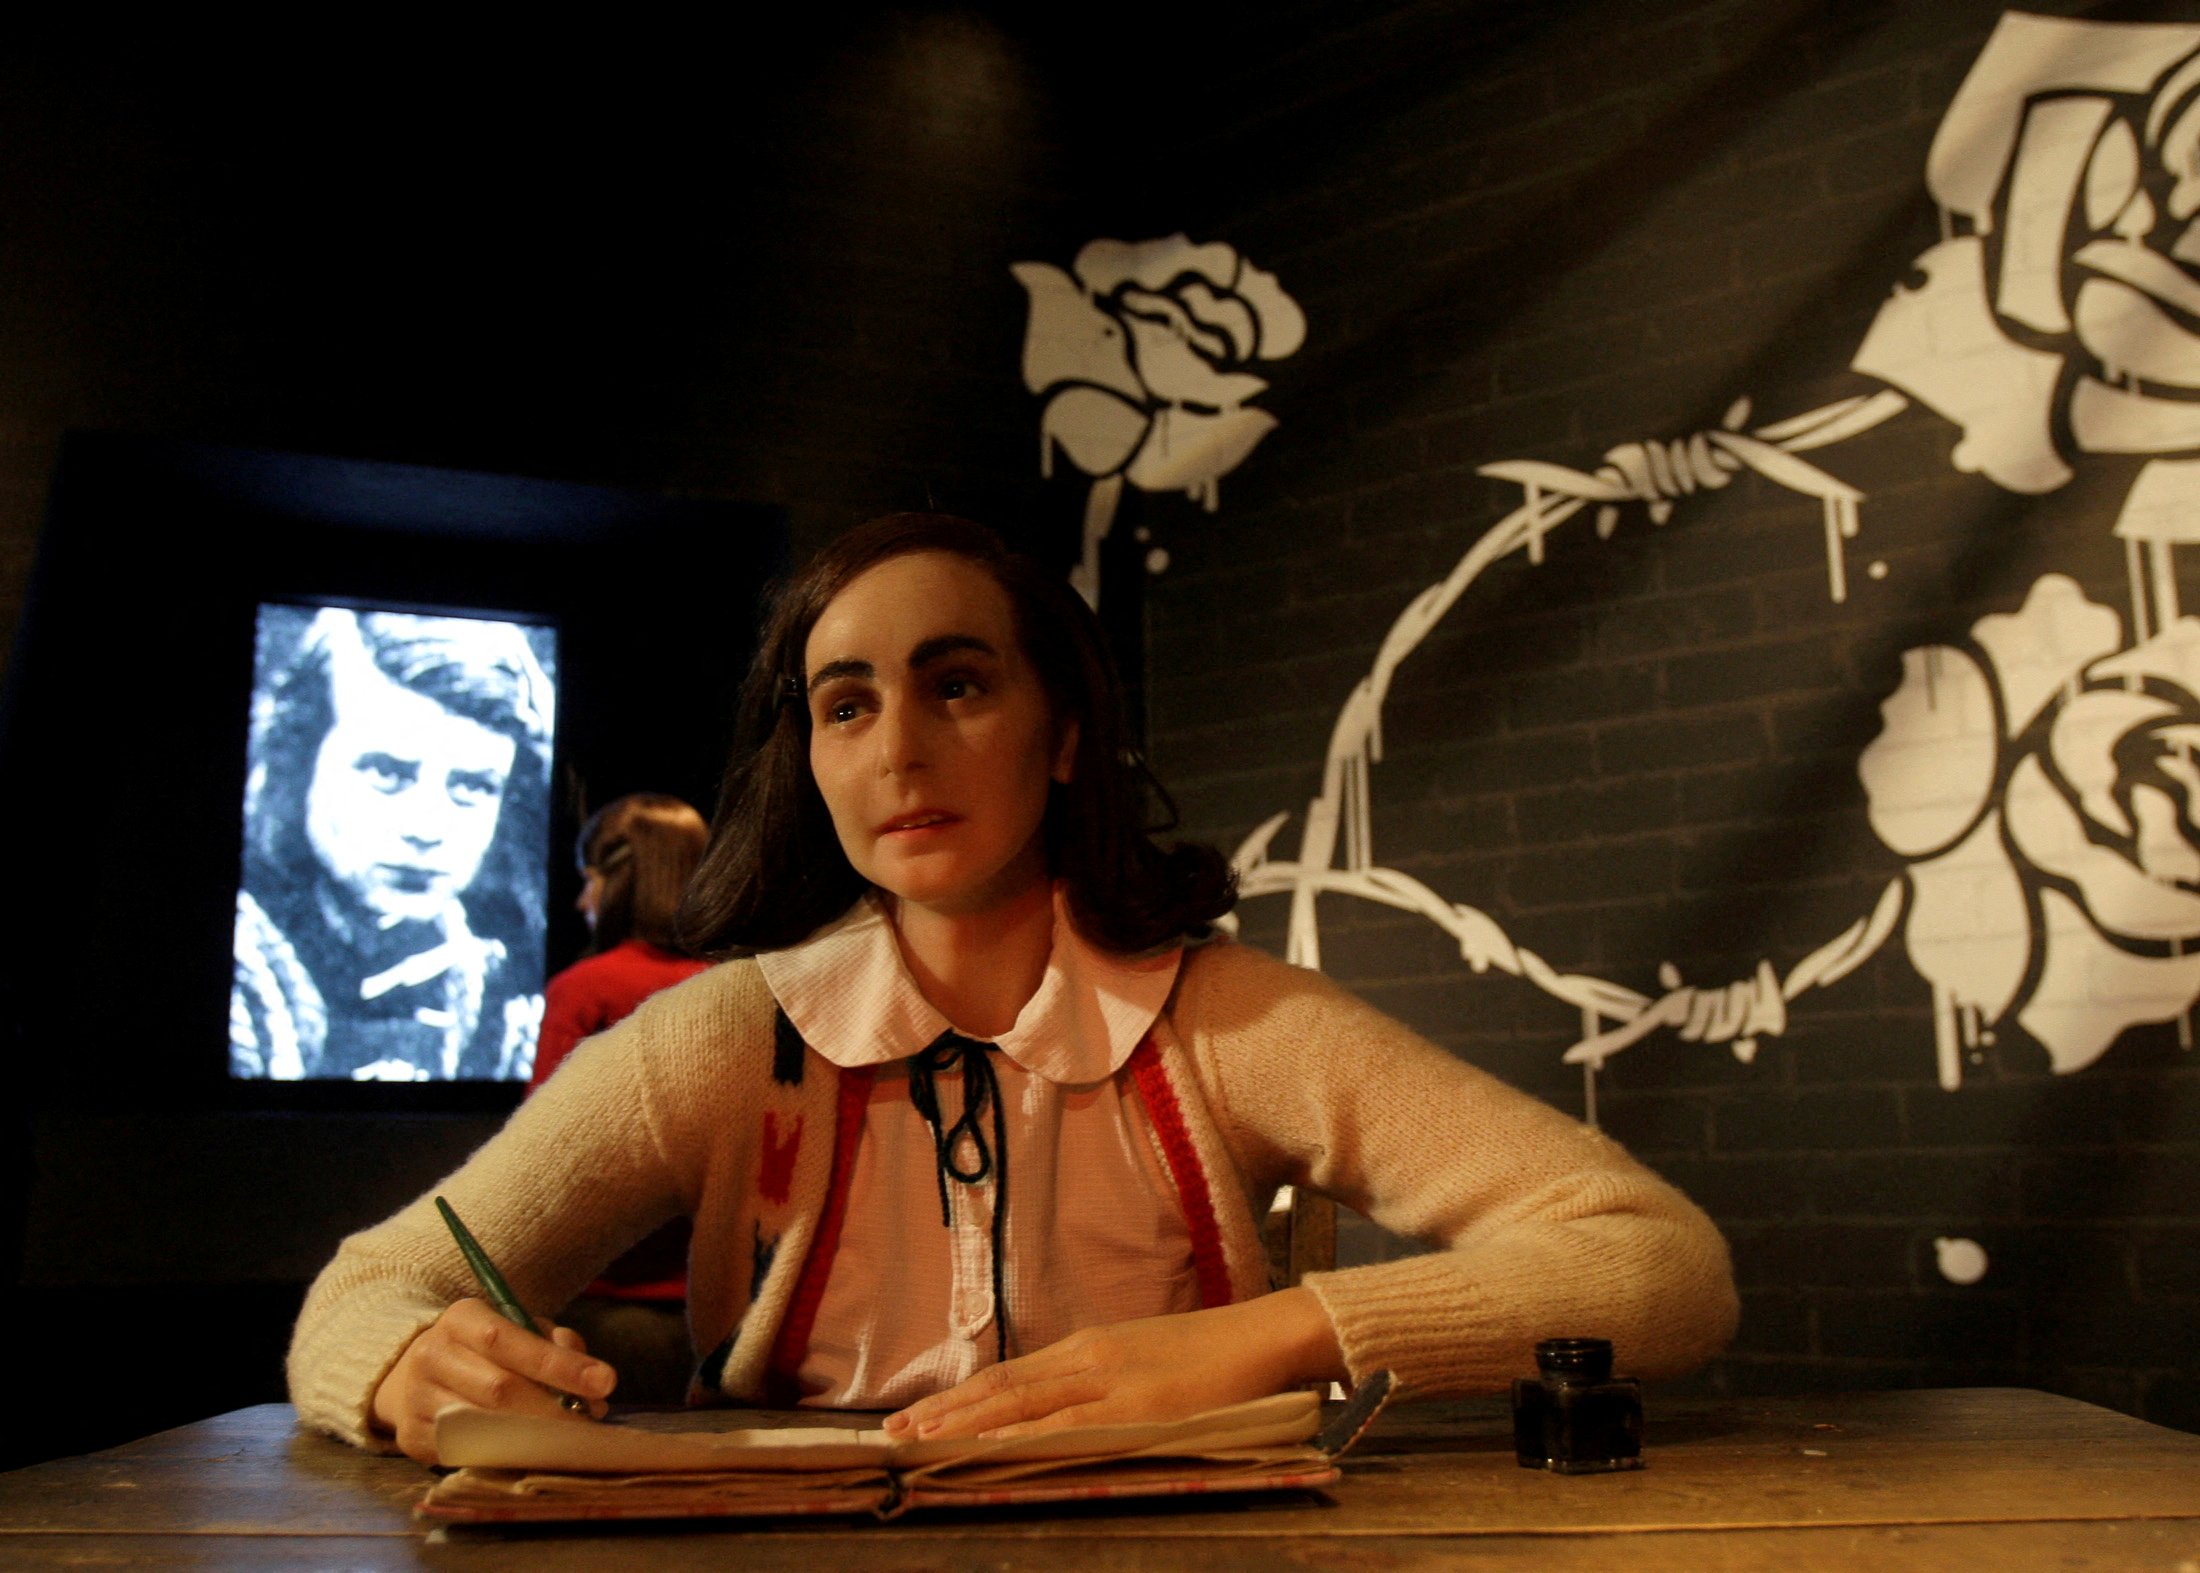 A wax figure of Anne Frank is presented to the public at Madame Tussaud's in Berlin